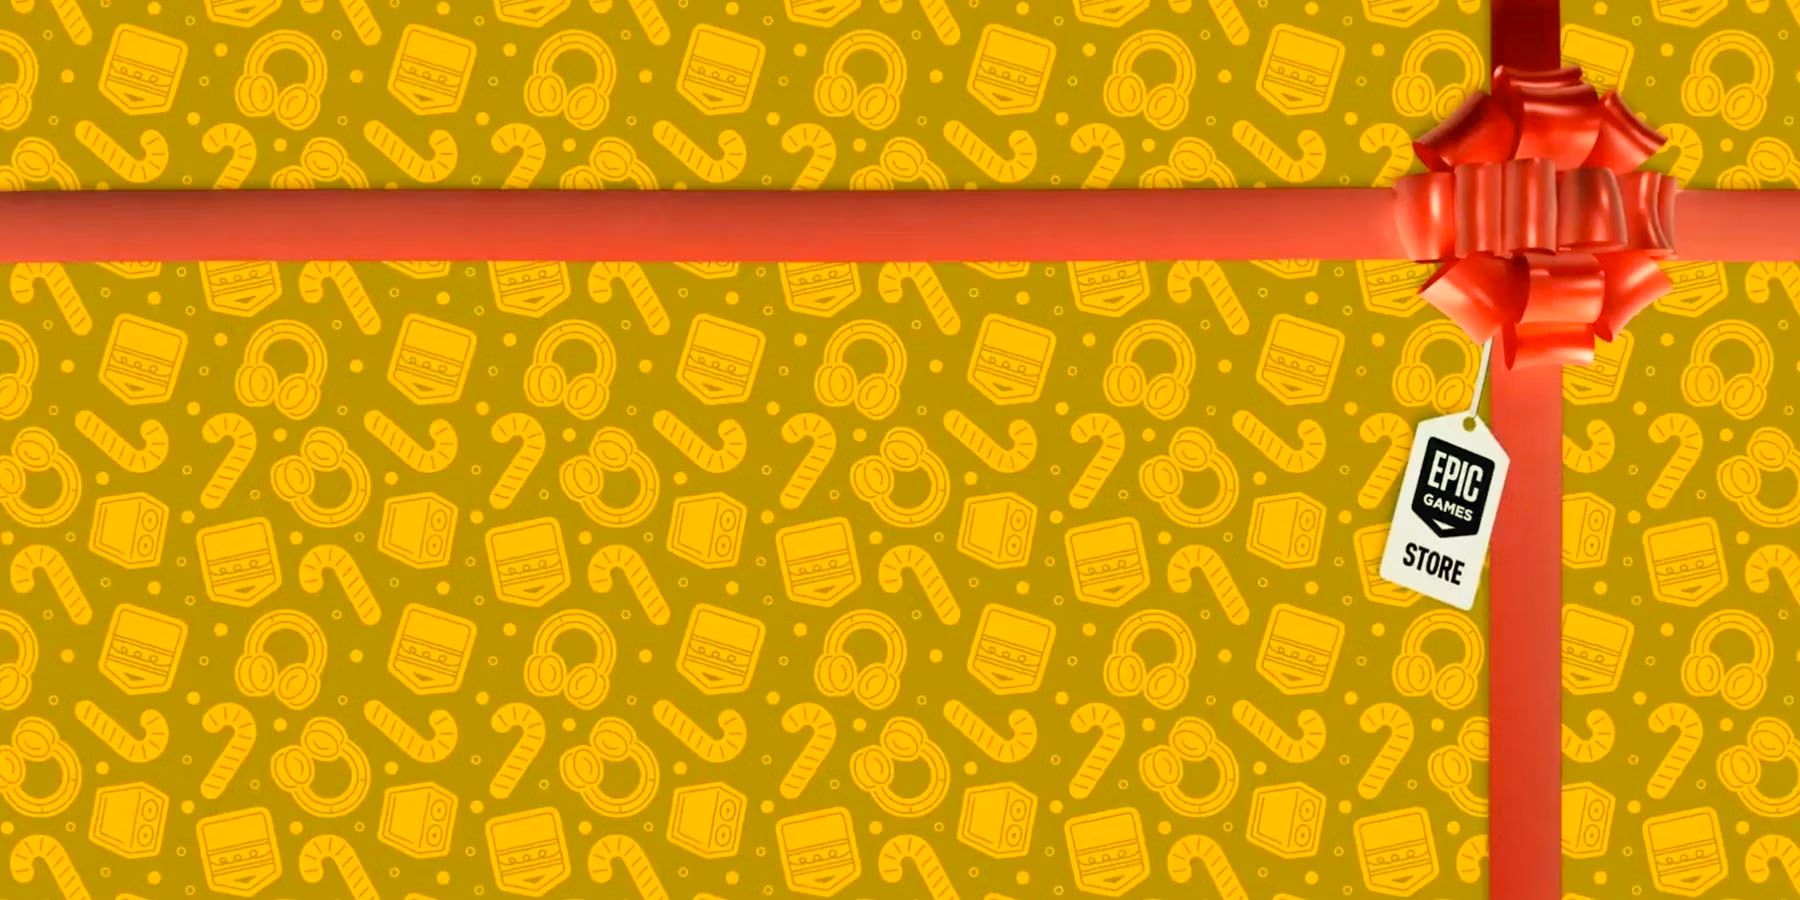 epic games store wrapping paper yellow